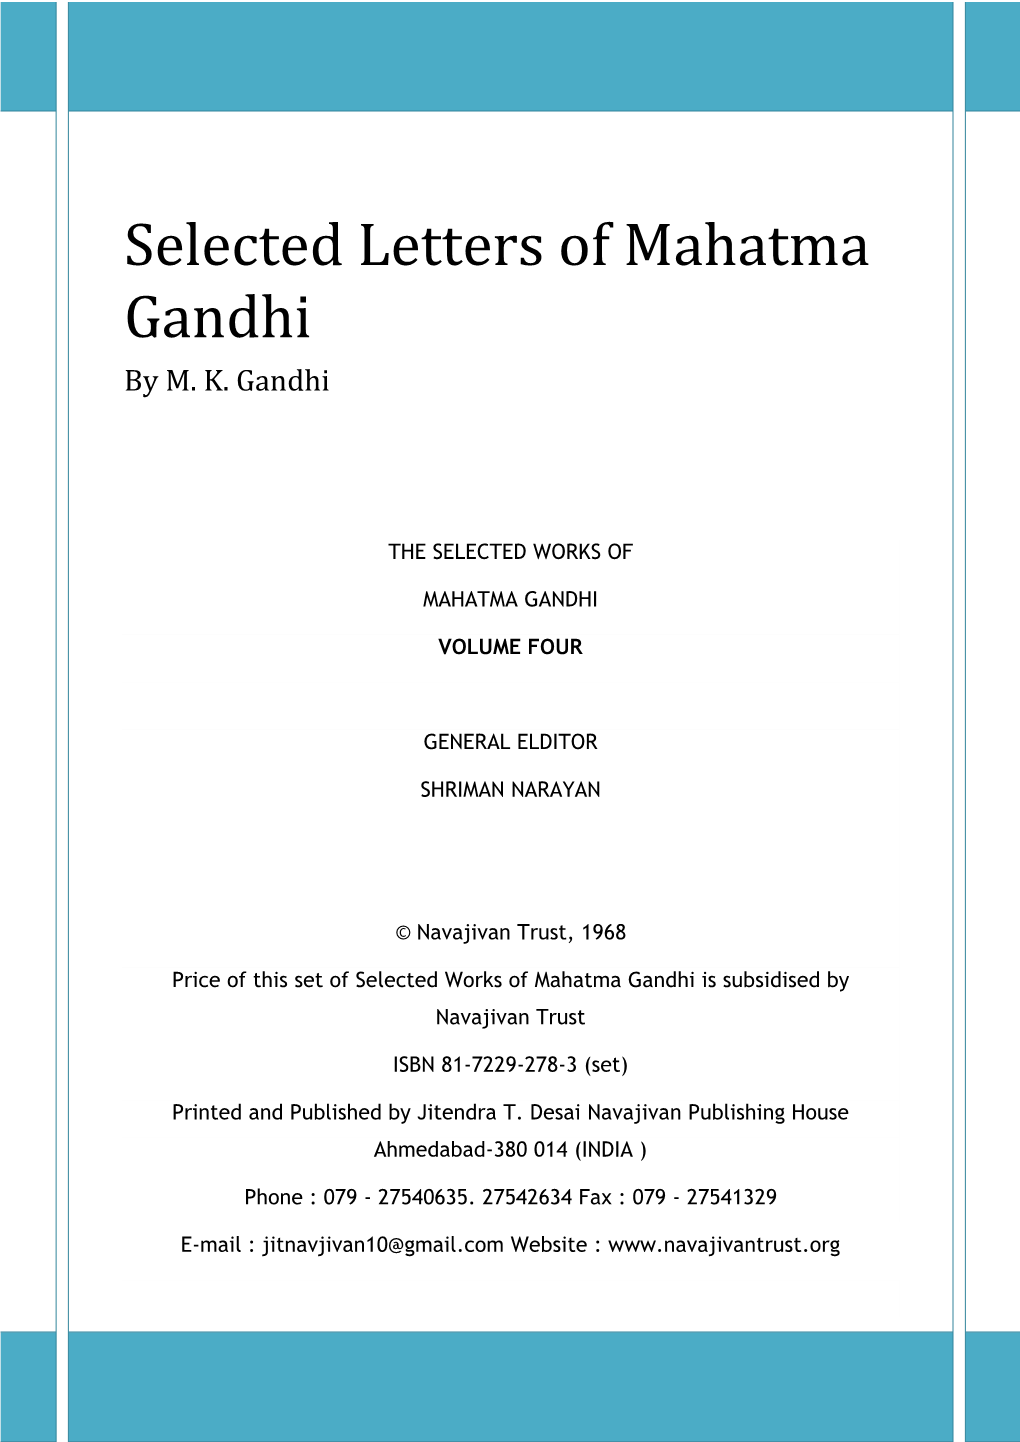 Selected Letters of Mahatma Gandhi by M